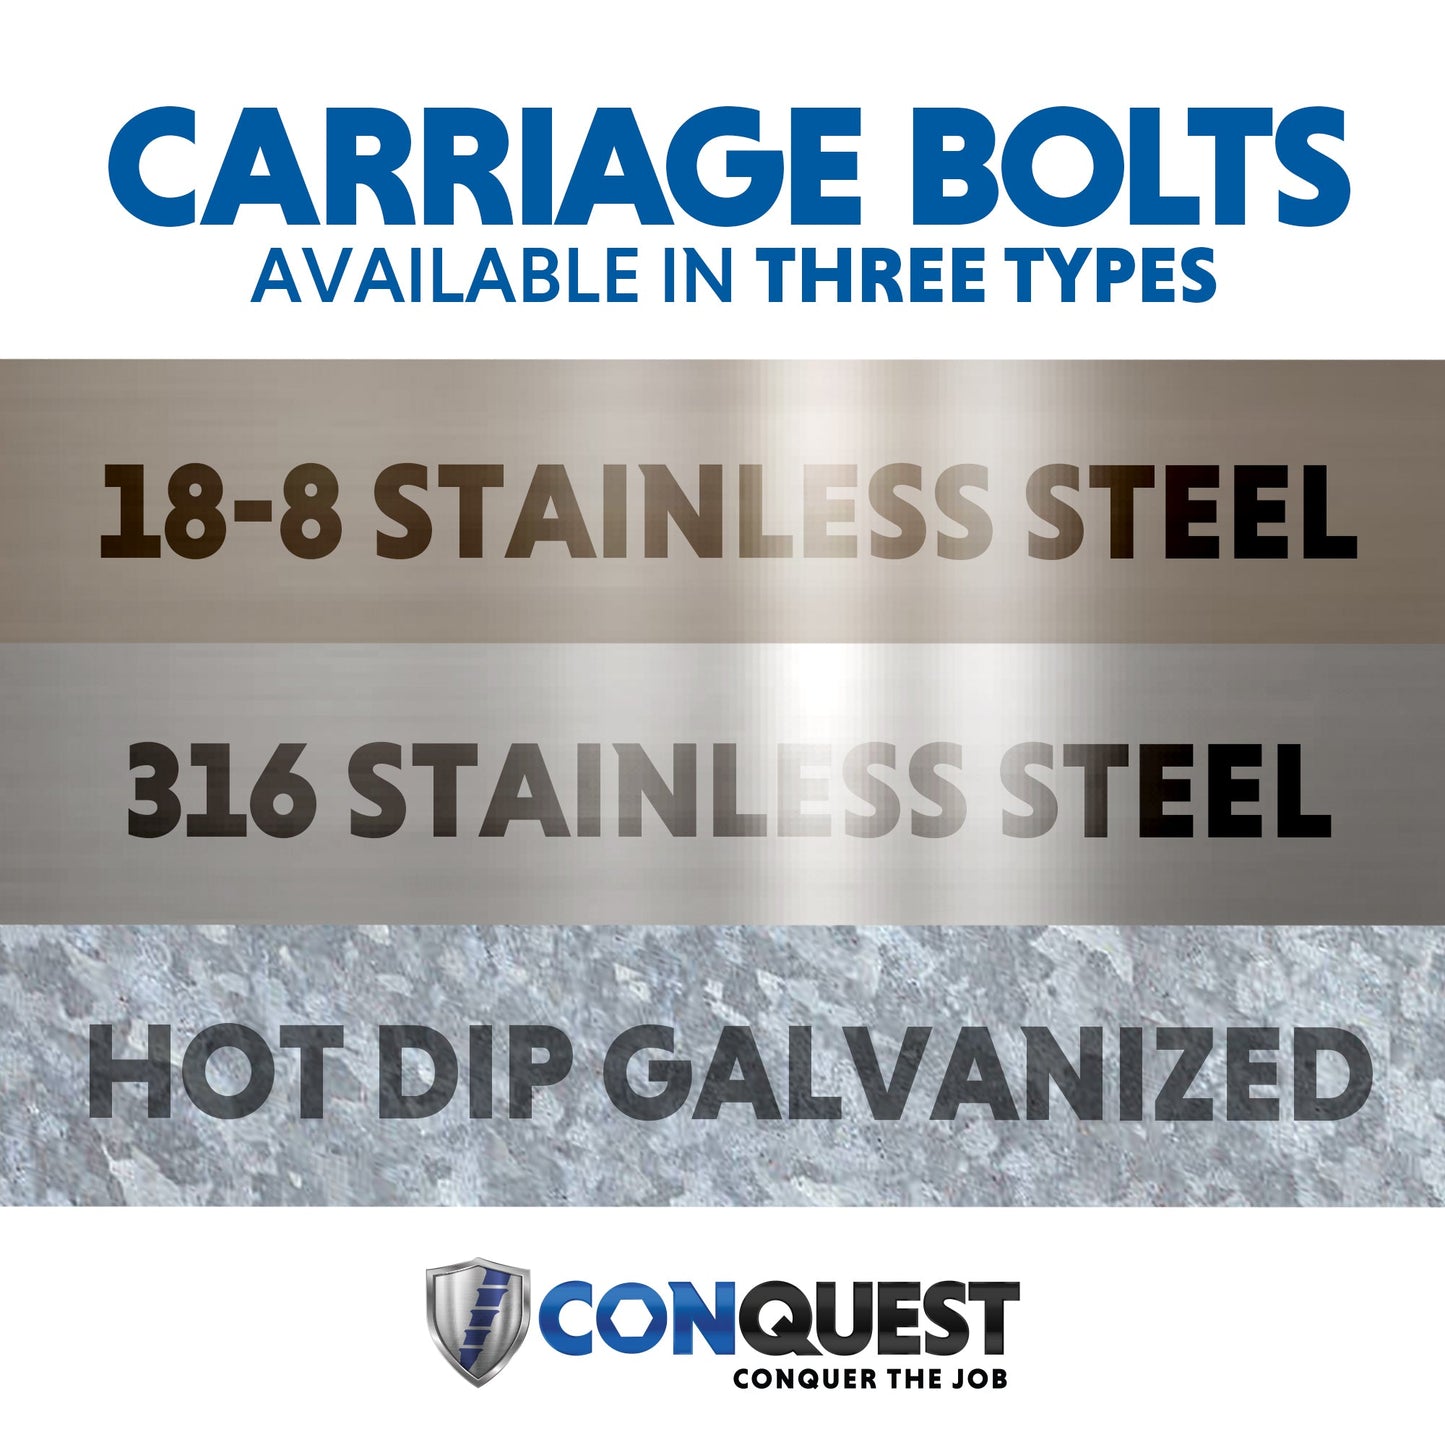 Conquest Carriage Bolts and Nuts are Available in 3 Types: 18-8 Stainless Steel, 316 Stainless Steel and Hot Dip Galvanized